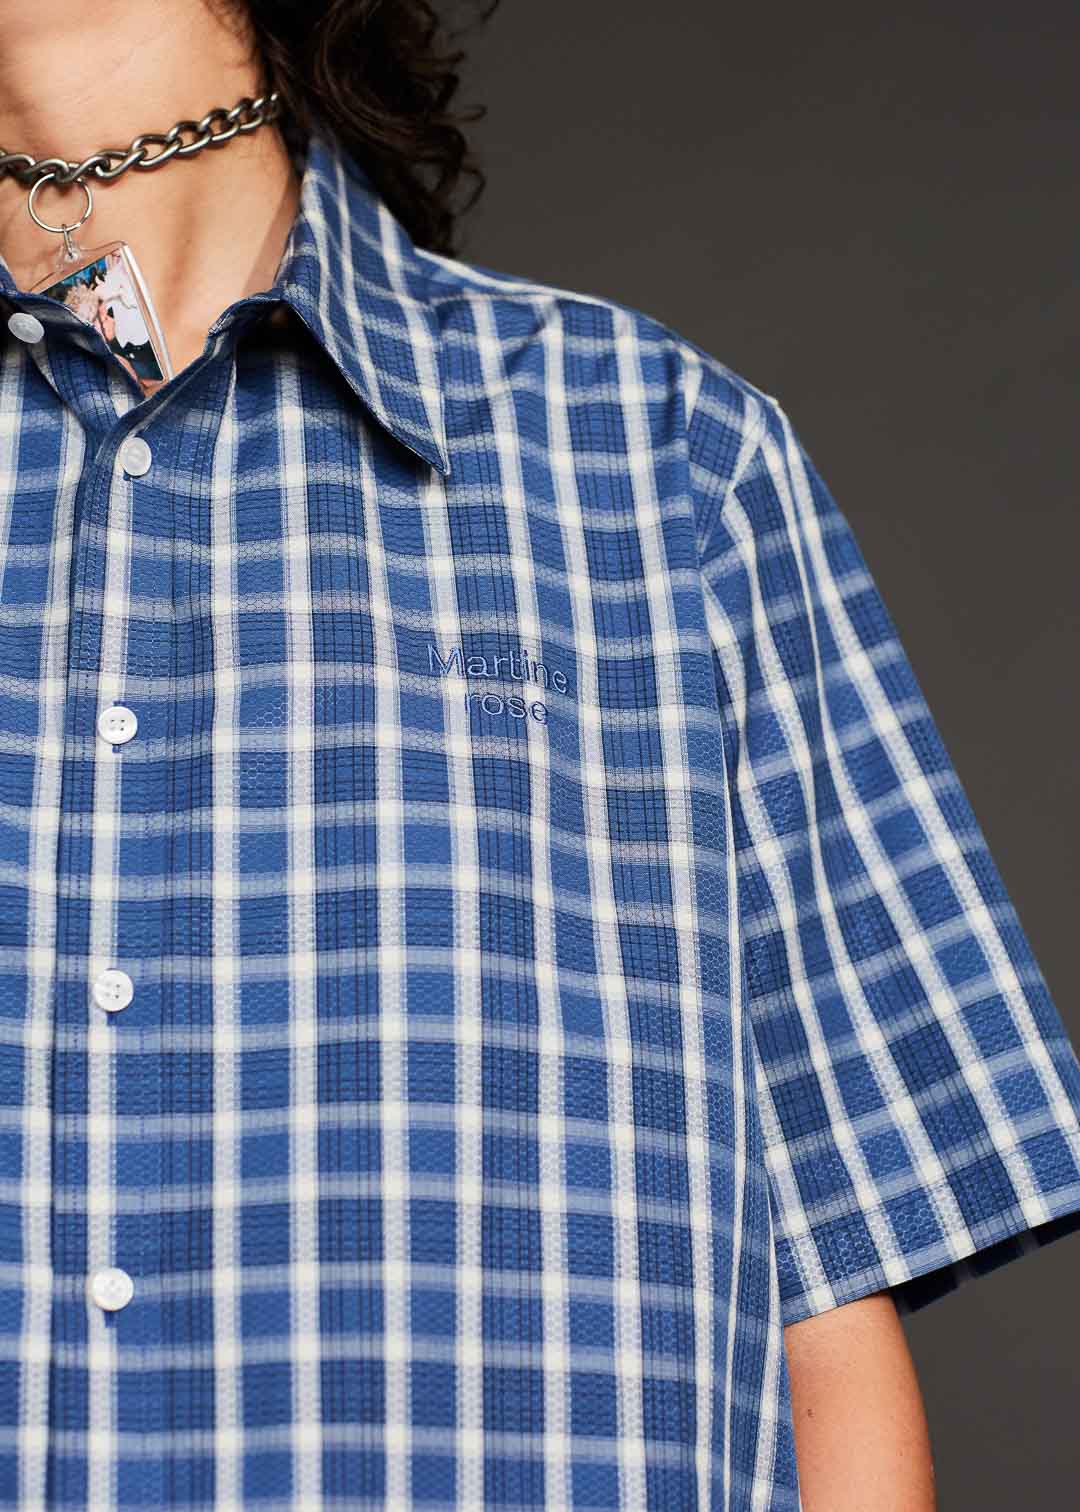 CLASSIC S/S SHIRT in BLUE CHECK